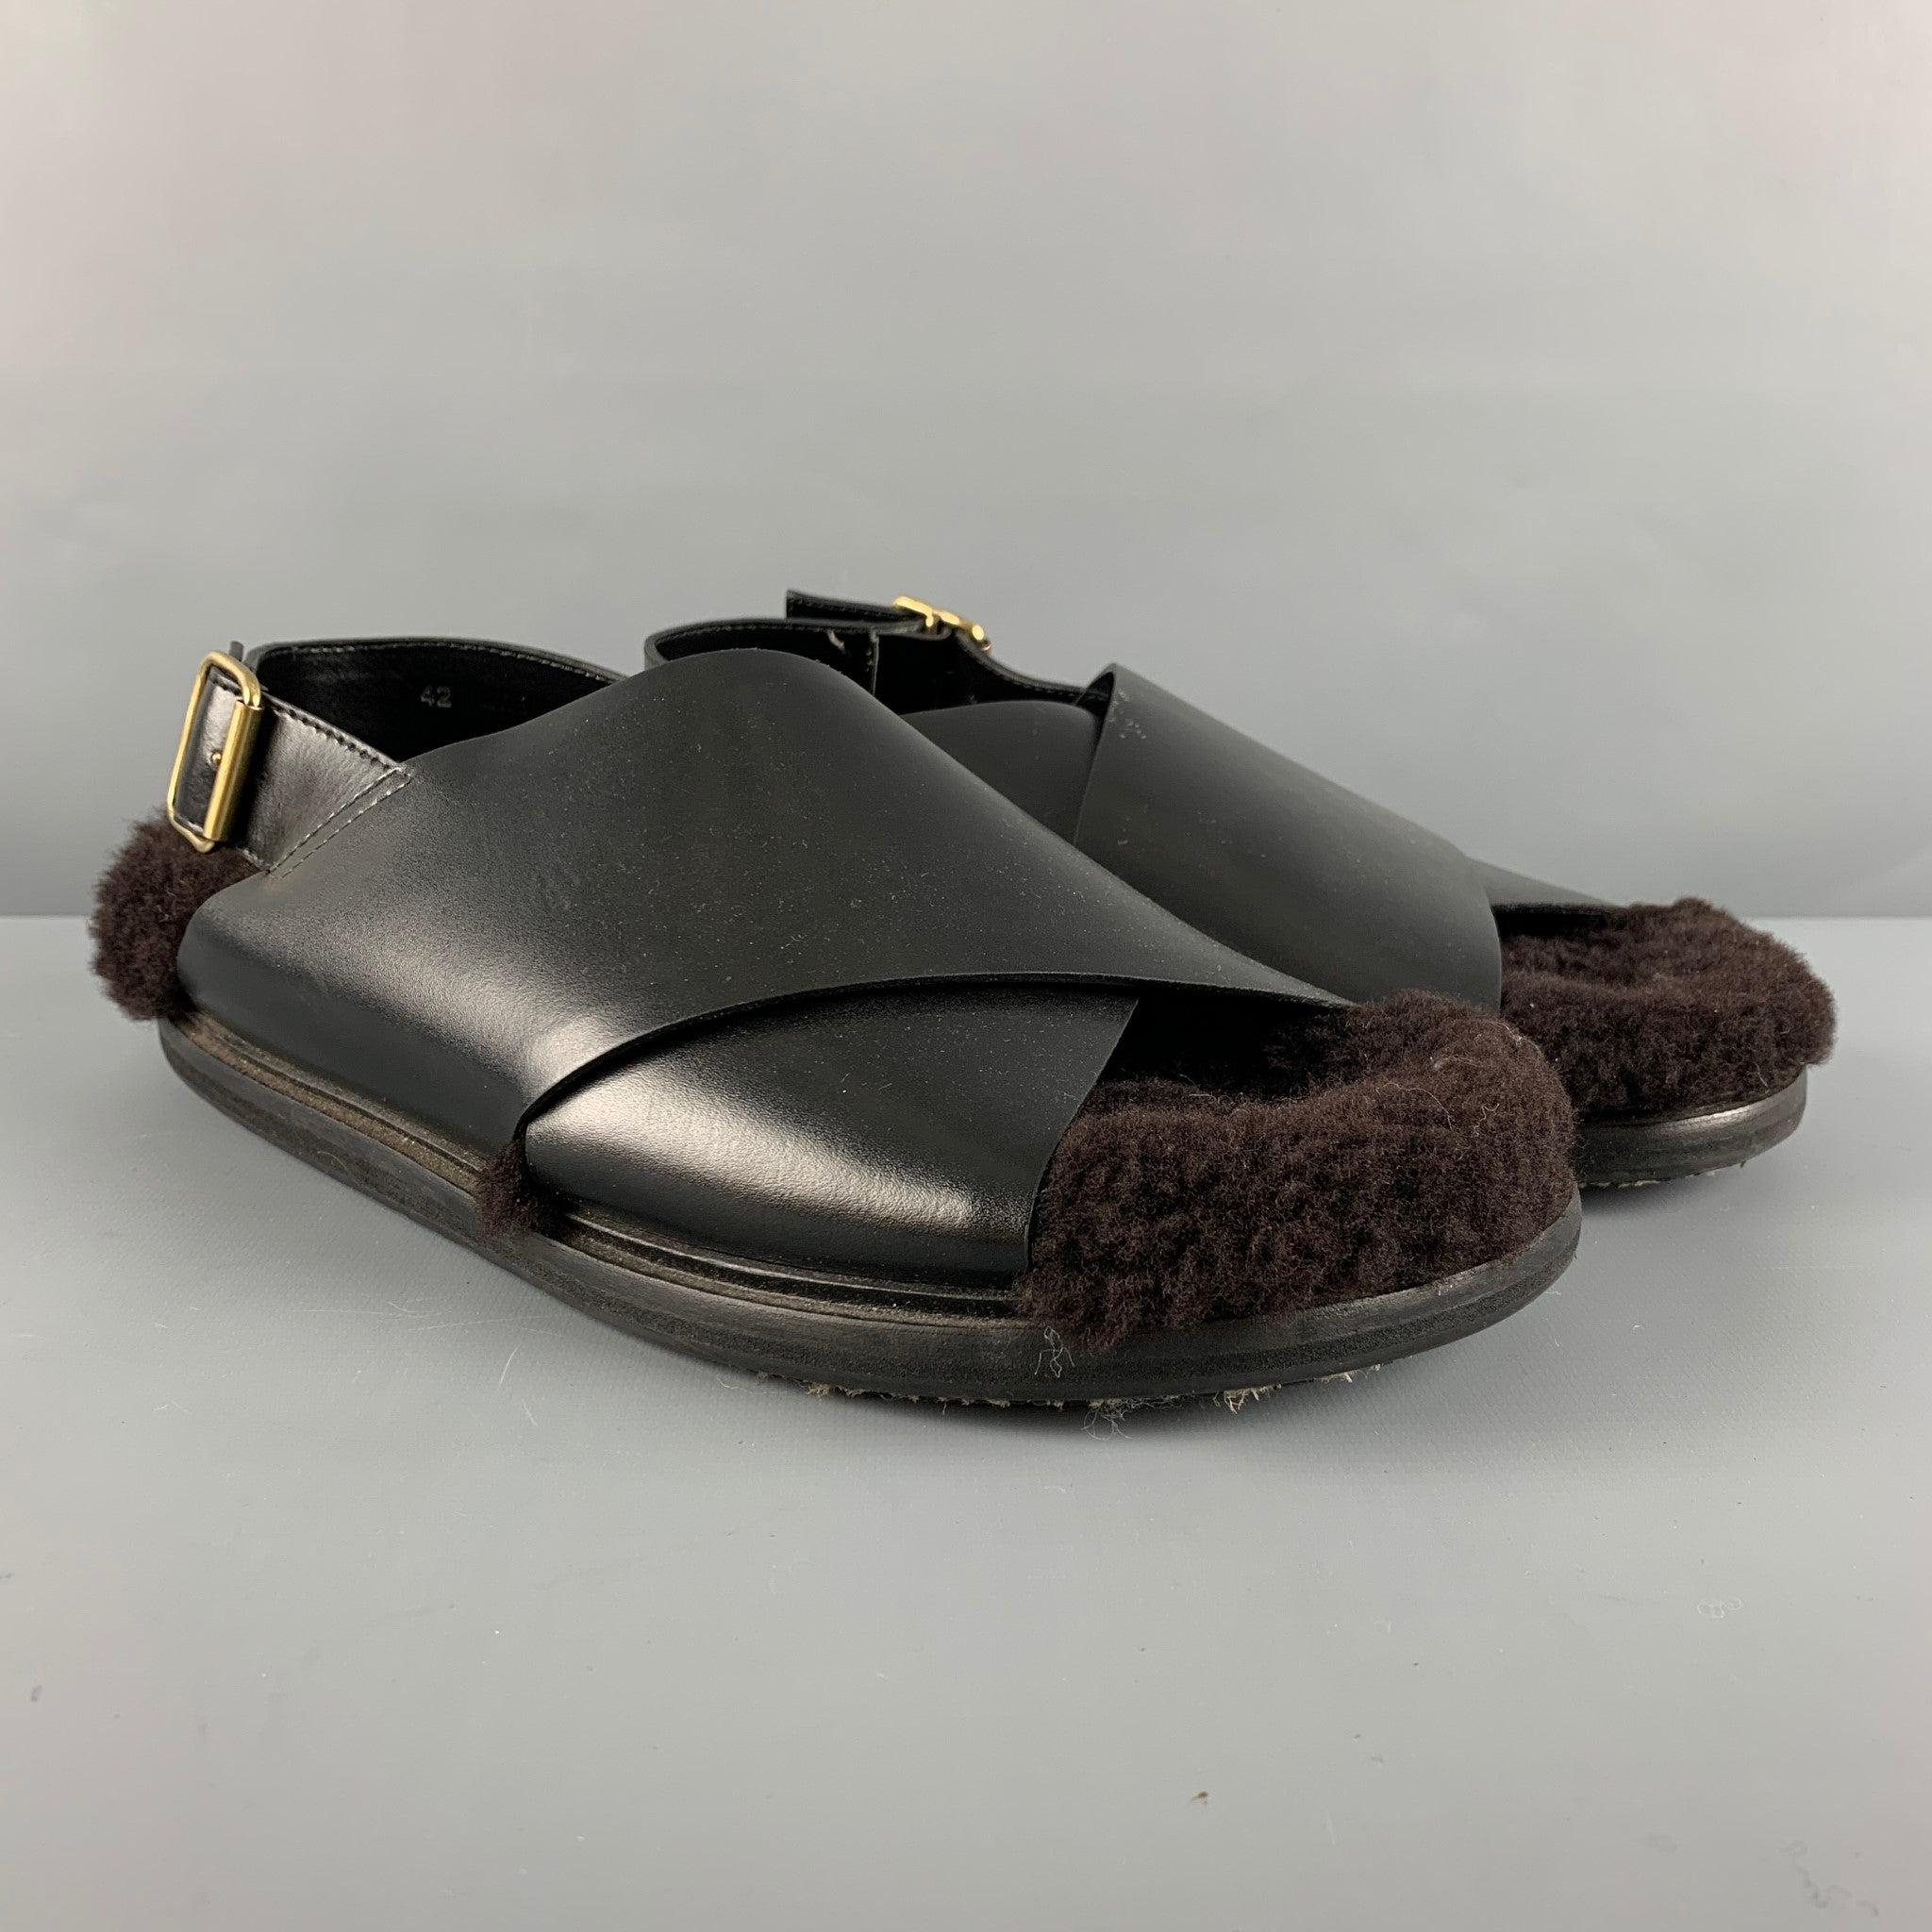 MARNI sandals comes in a black leather material featuring a faux fur top detail, crossover strap design, and sling back closure. Made in Italy.Very Good Pre-Owned Condition. 

Marked:   42Outsole: 12 inches  x 5 inches   
  
  
 
Reference: